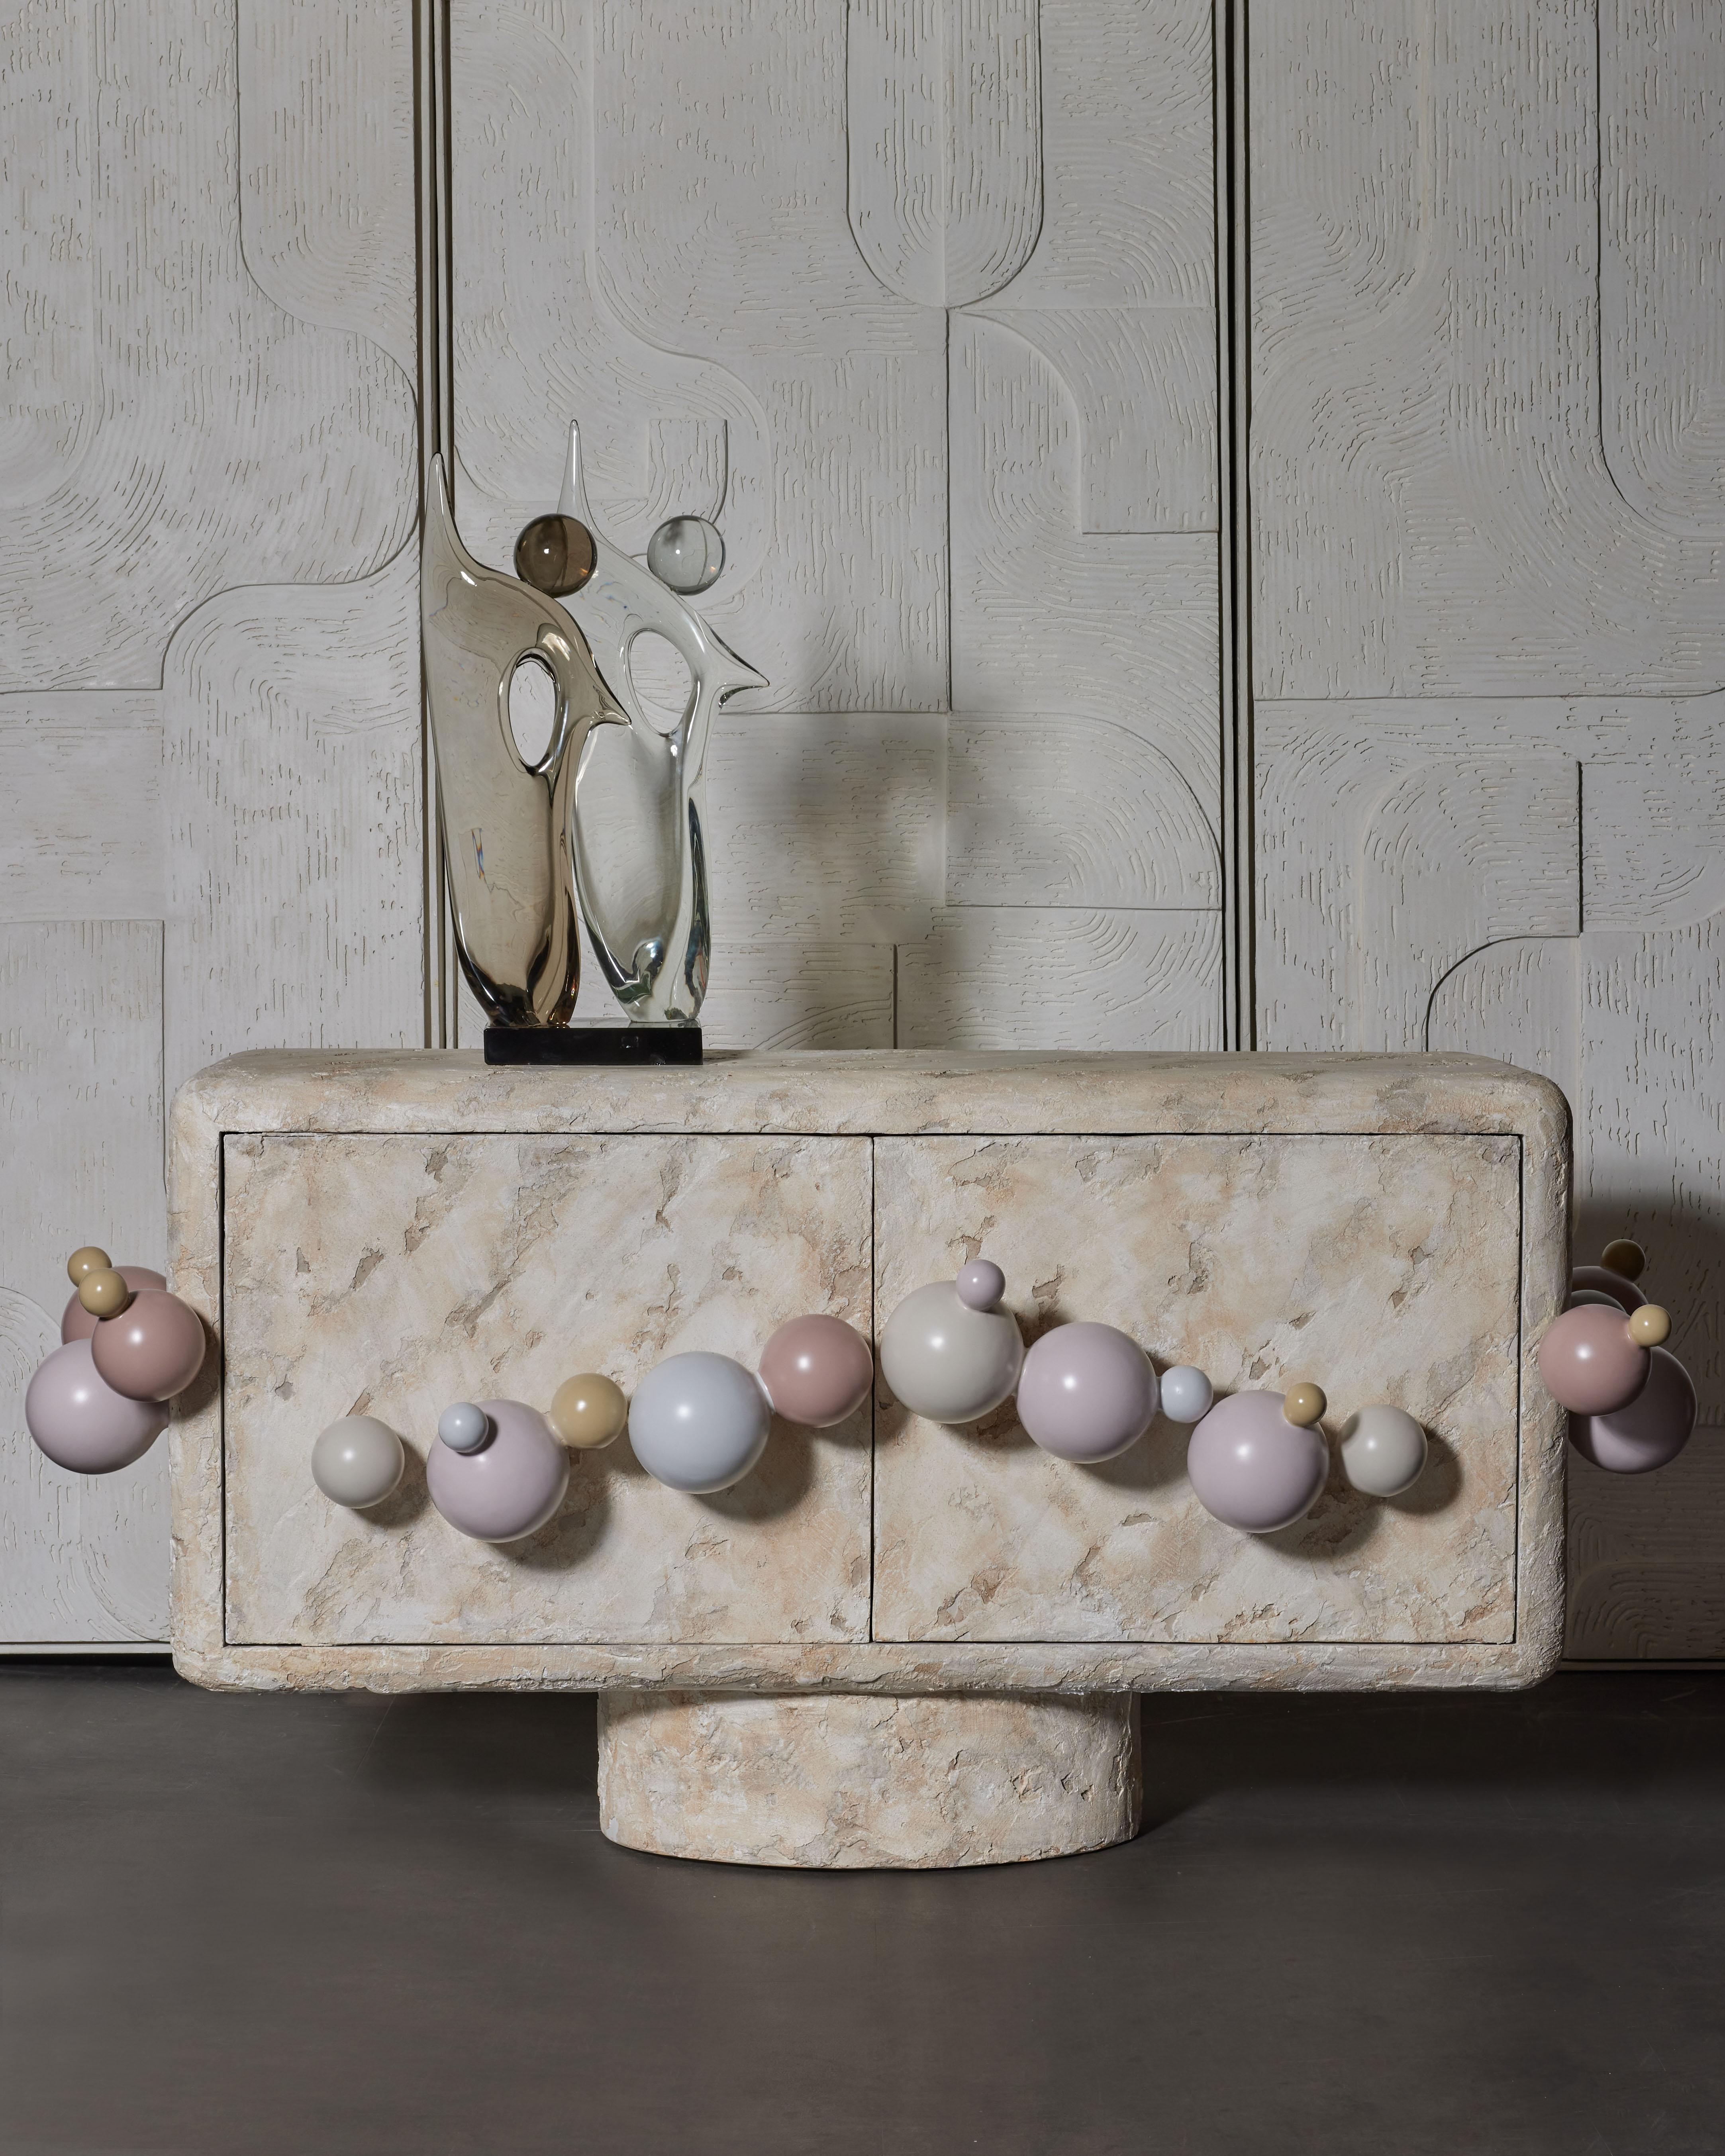 2 doors sideboard in plaster, resin et travertine stone powder. Wooden structure.
Signed piece by the artist Nicolet for the Galerie Glustin.
France, 2023.